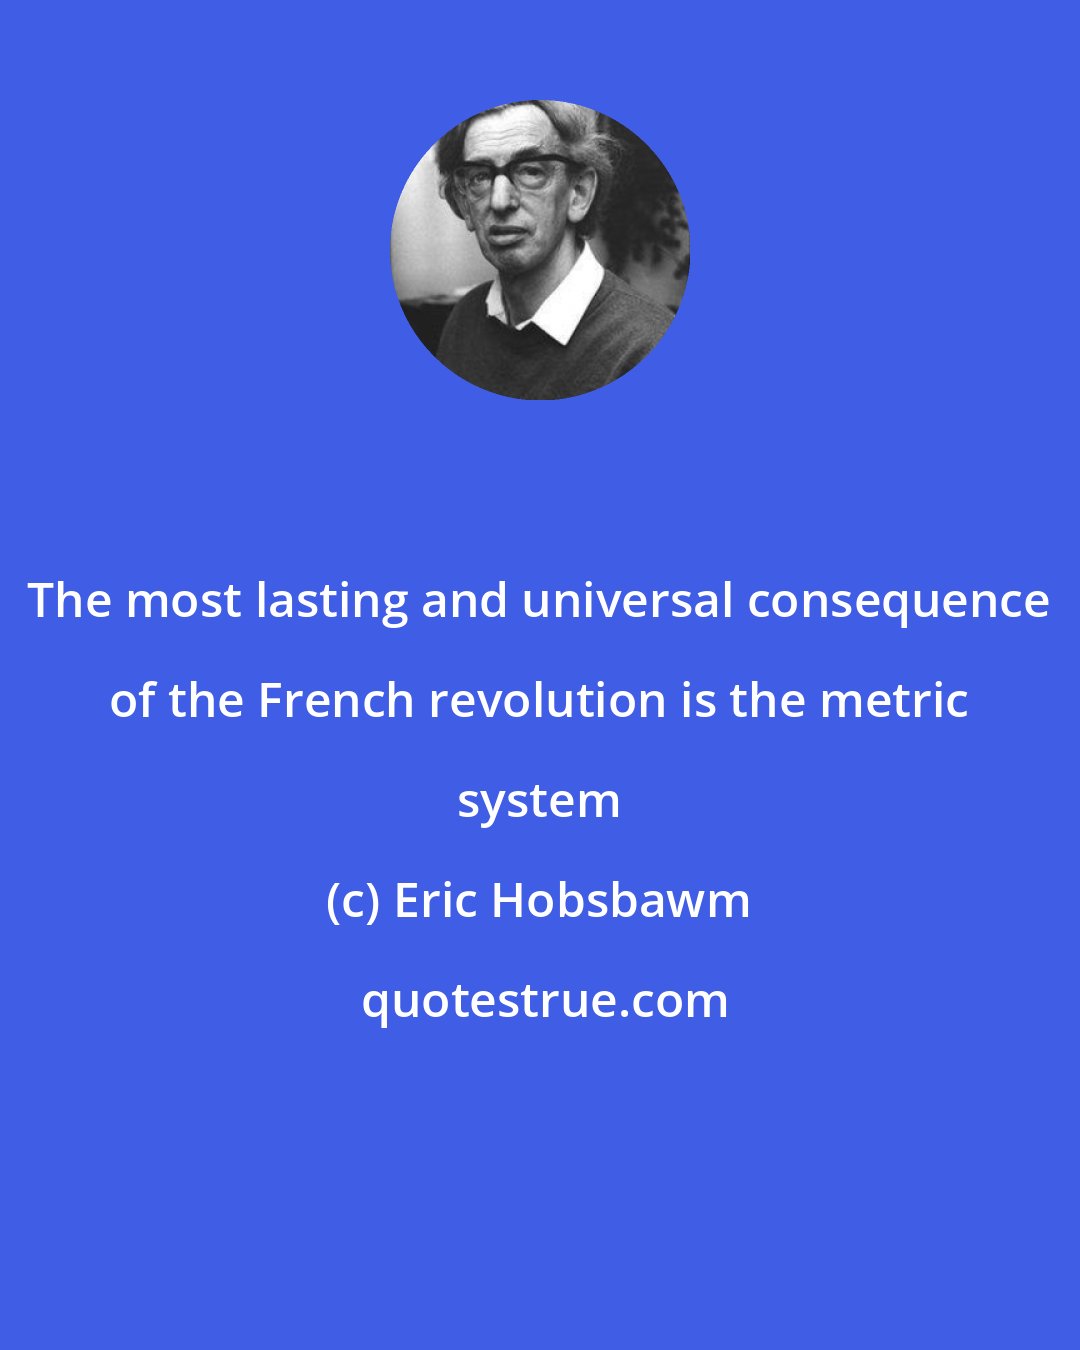 Eric Hobsbawm: The most lasting and universal consequence of the French revolution is the metric system